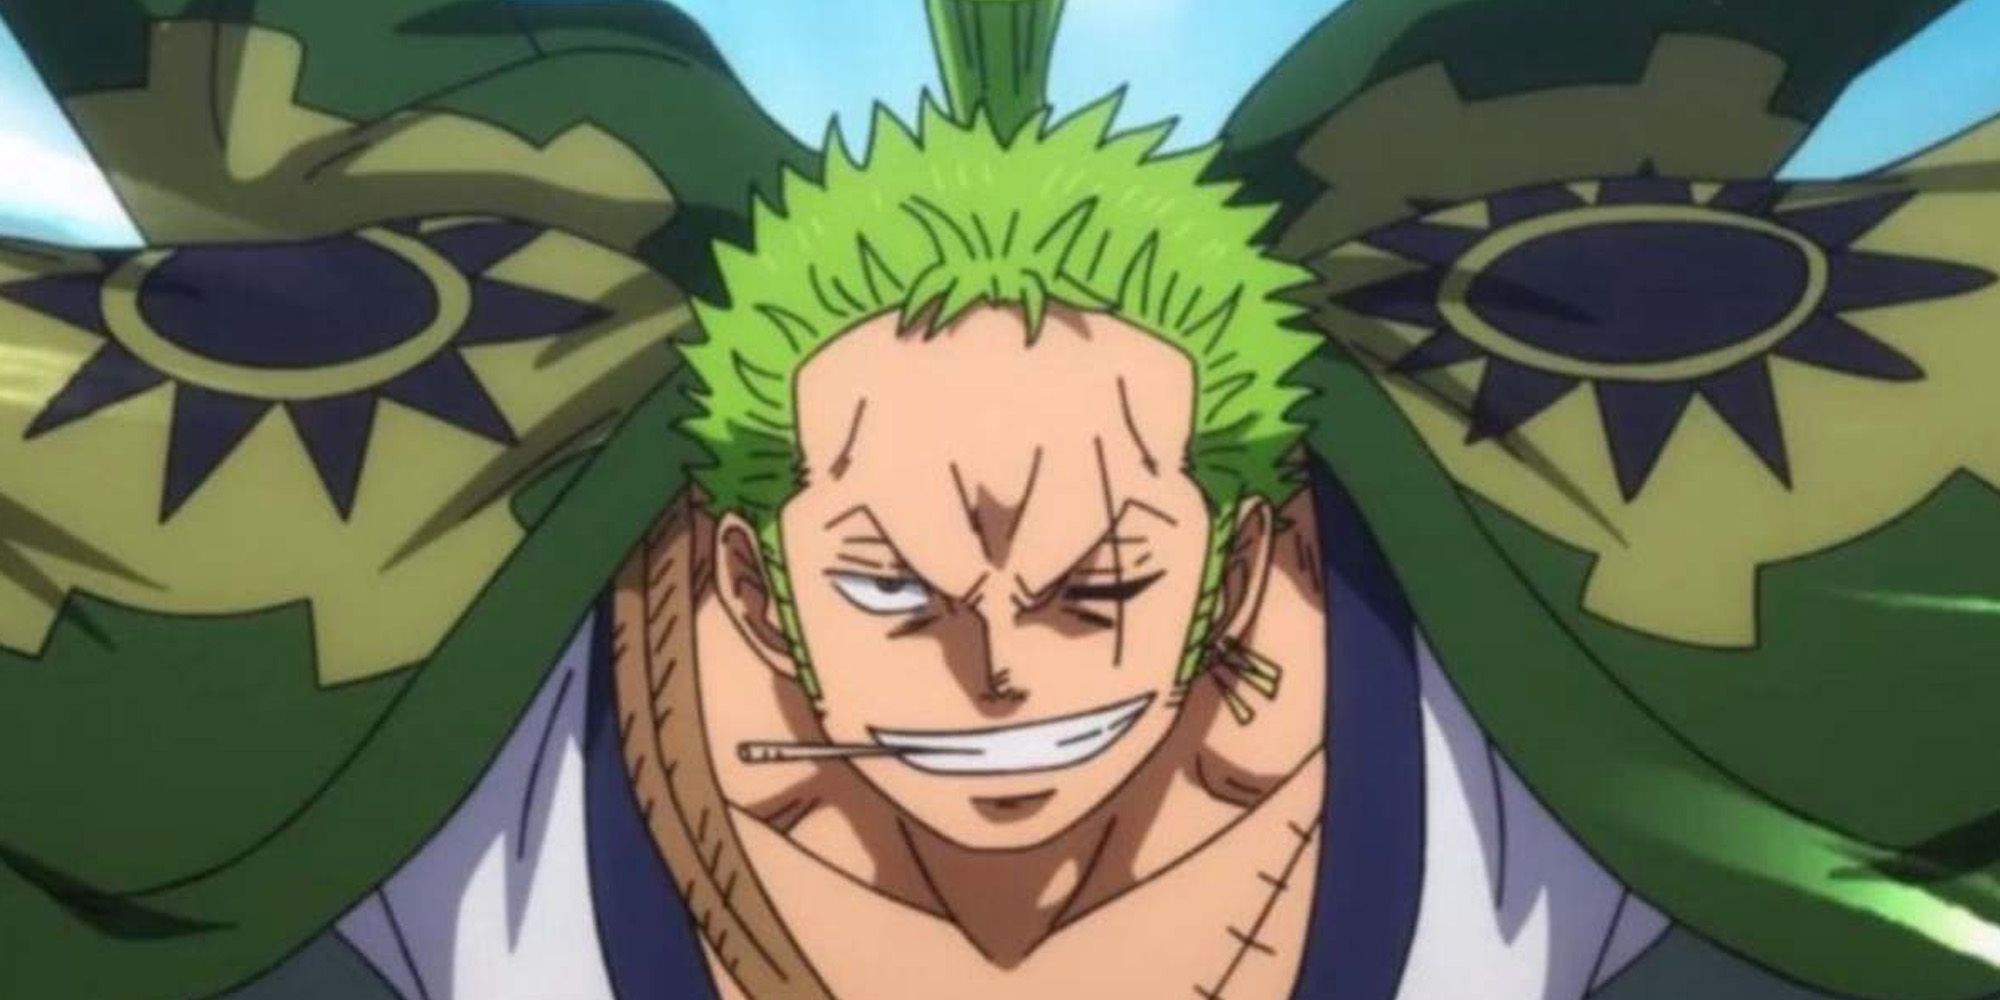 Zoro in wano from anime one piece